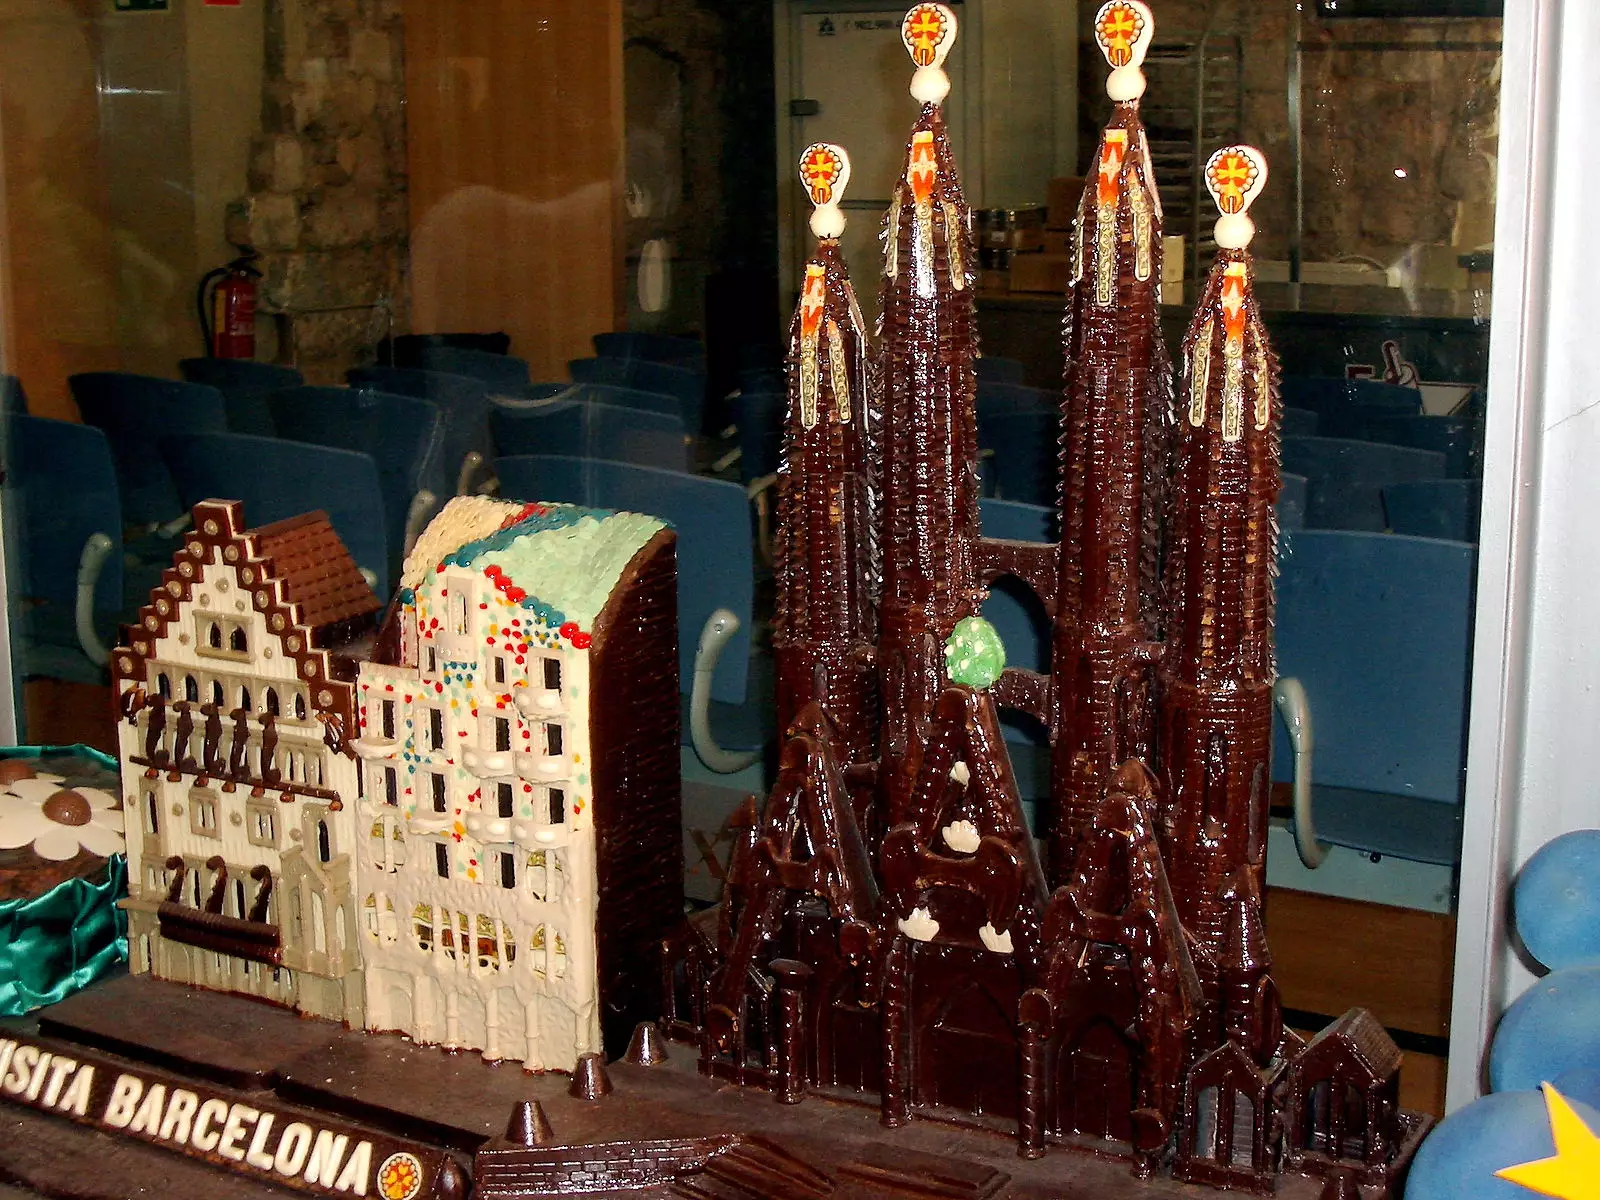 The cruise includes a trip to the Barcelona Chocolate Museum. (